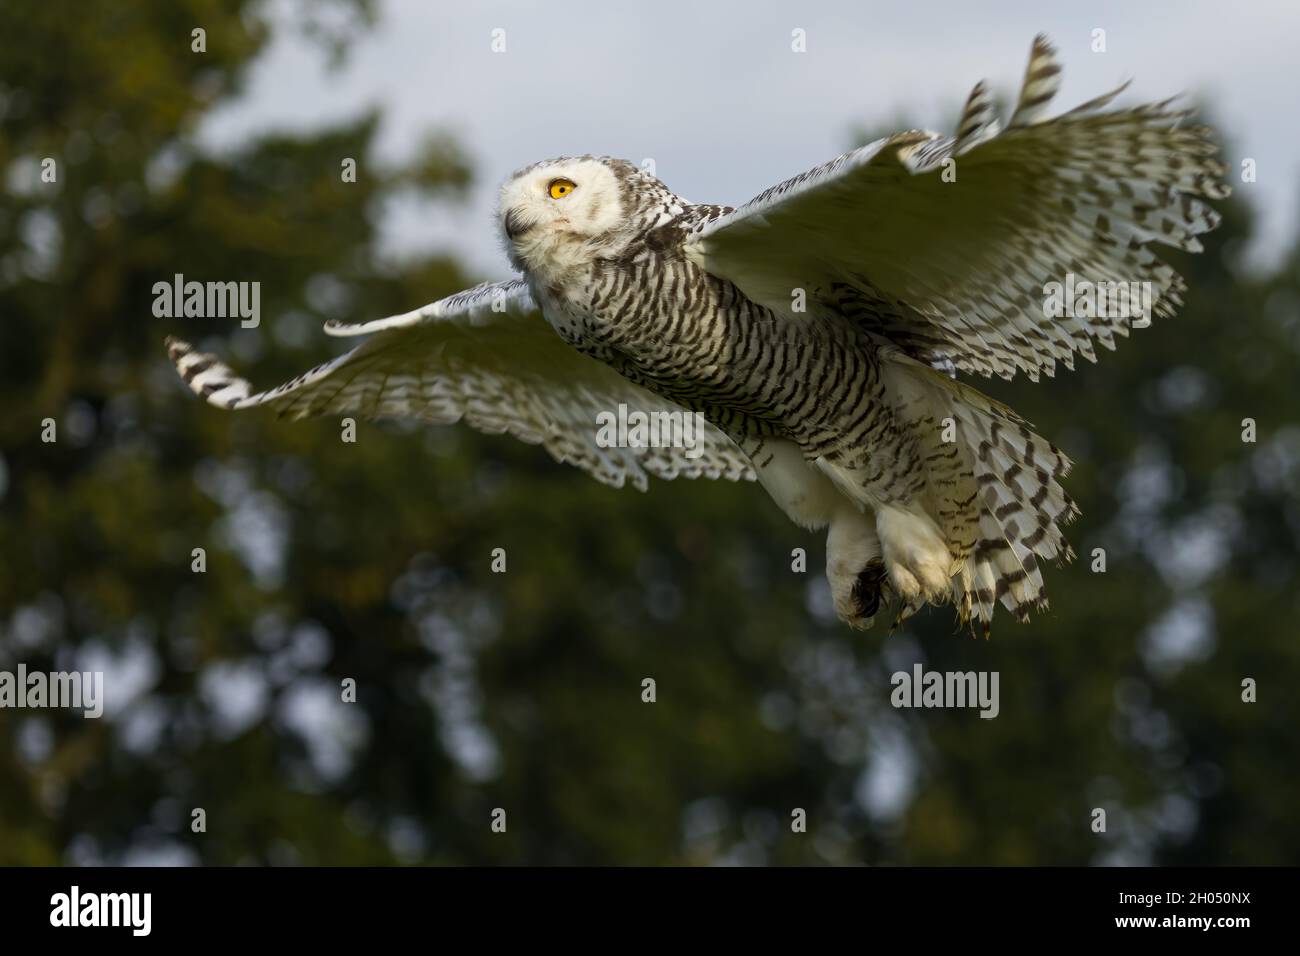 A beautiful snowy owl flying when twilight starts to fall Stock Photo